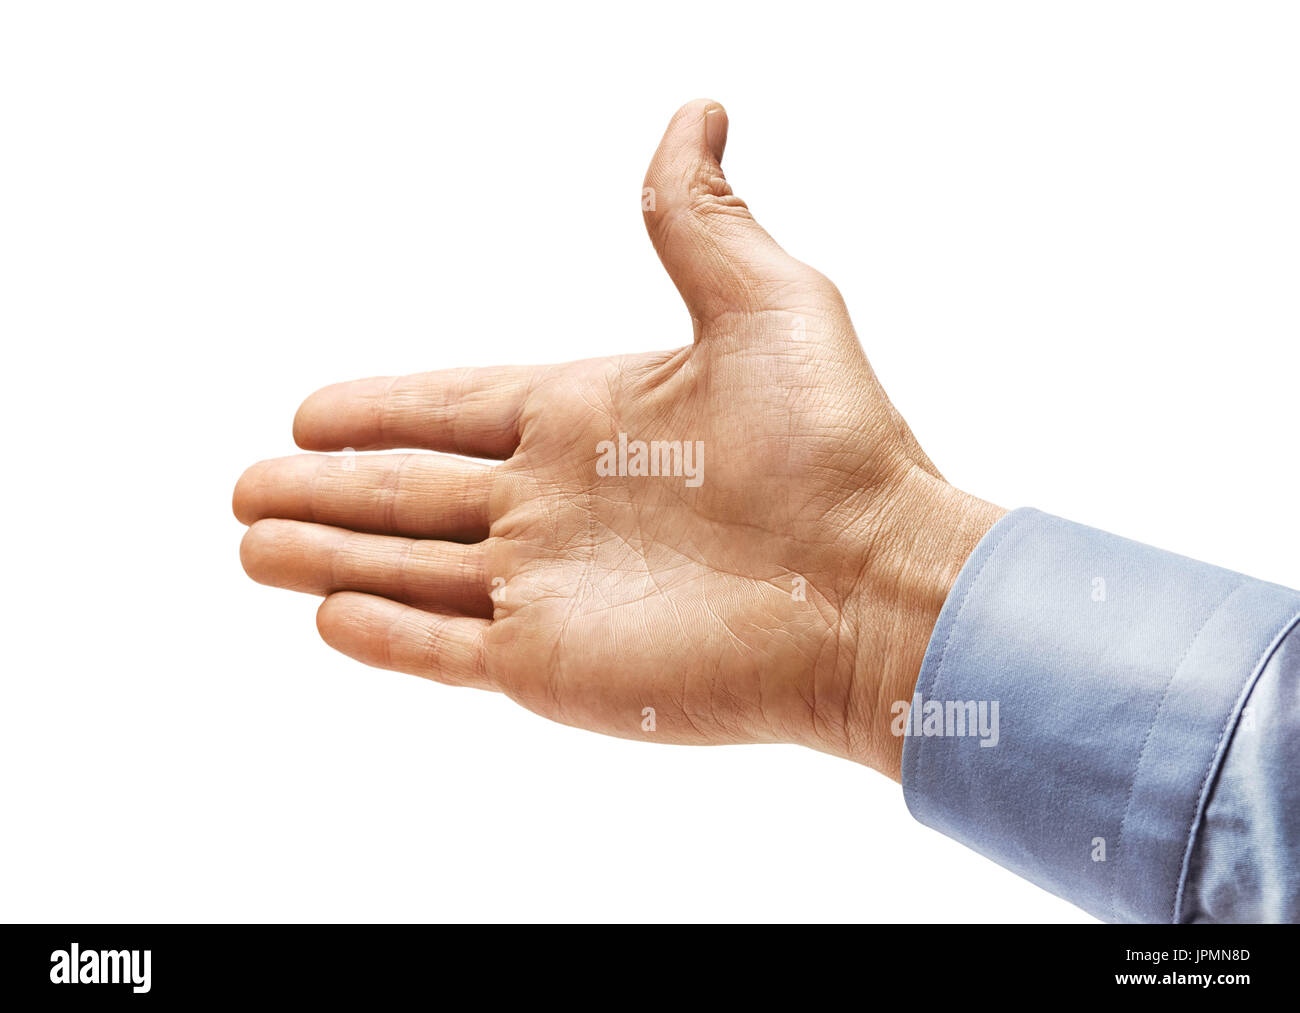 Man's hand in a shirt outstretched in greeting isolated on white background. Close up. High resolution Stock Photo